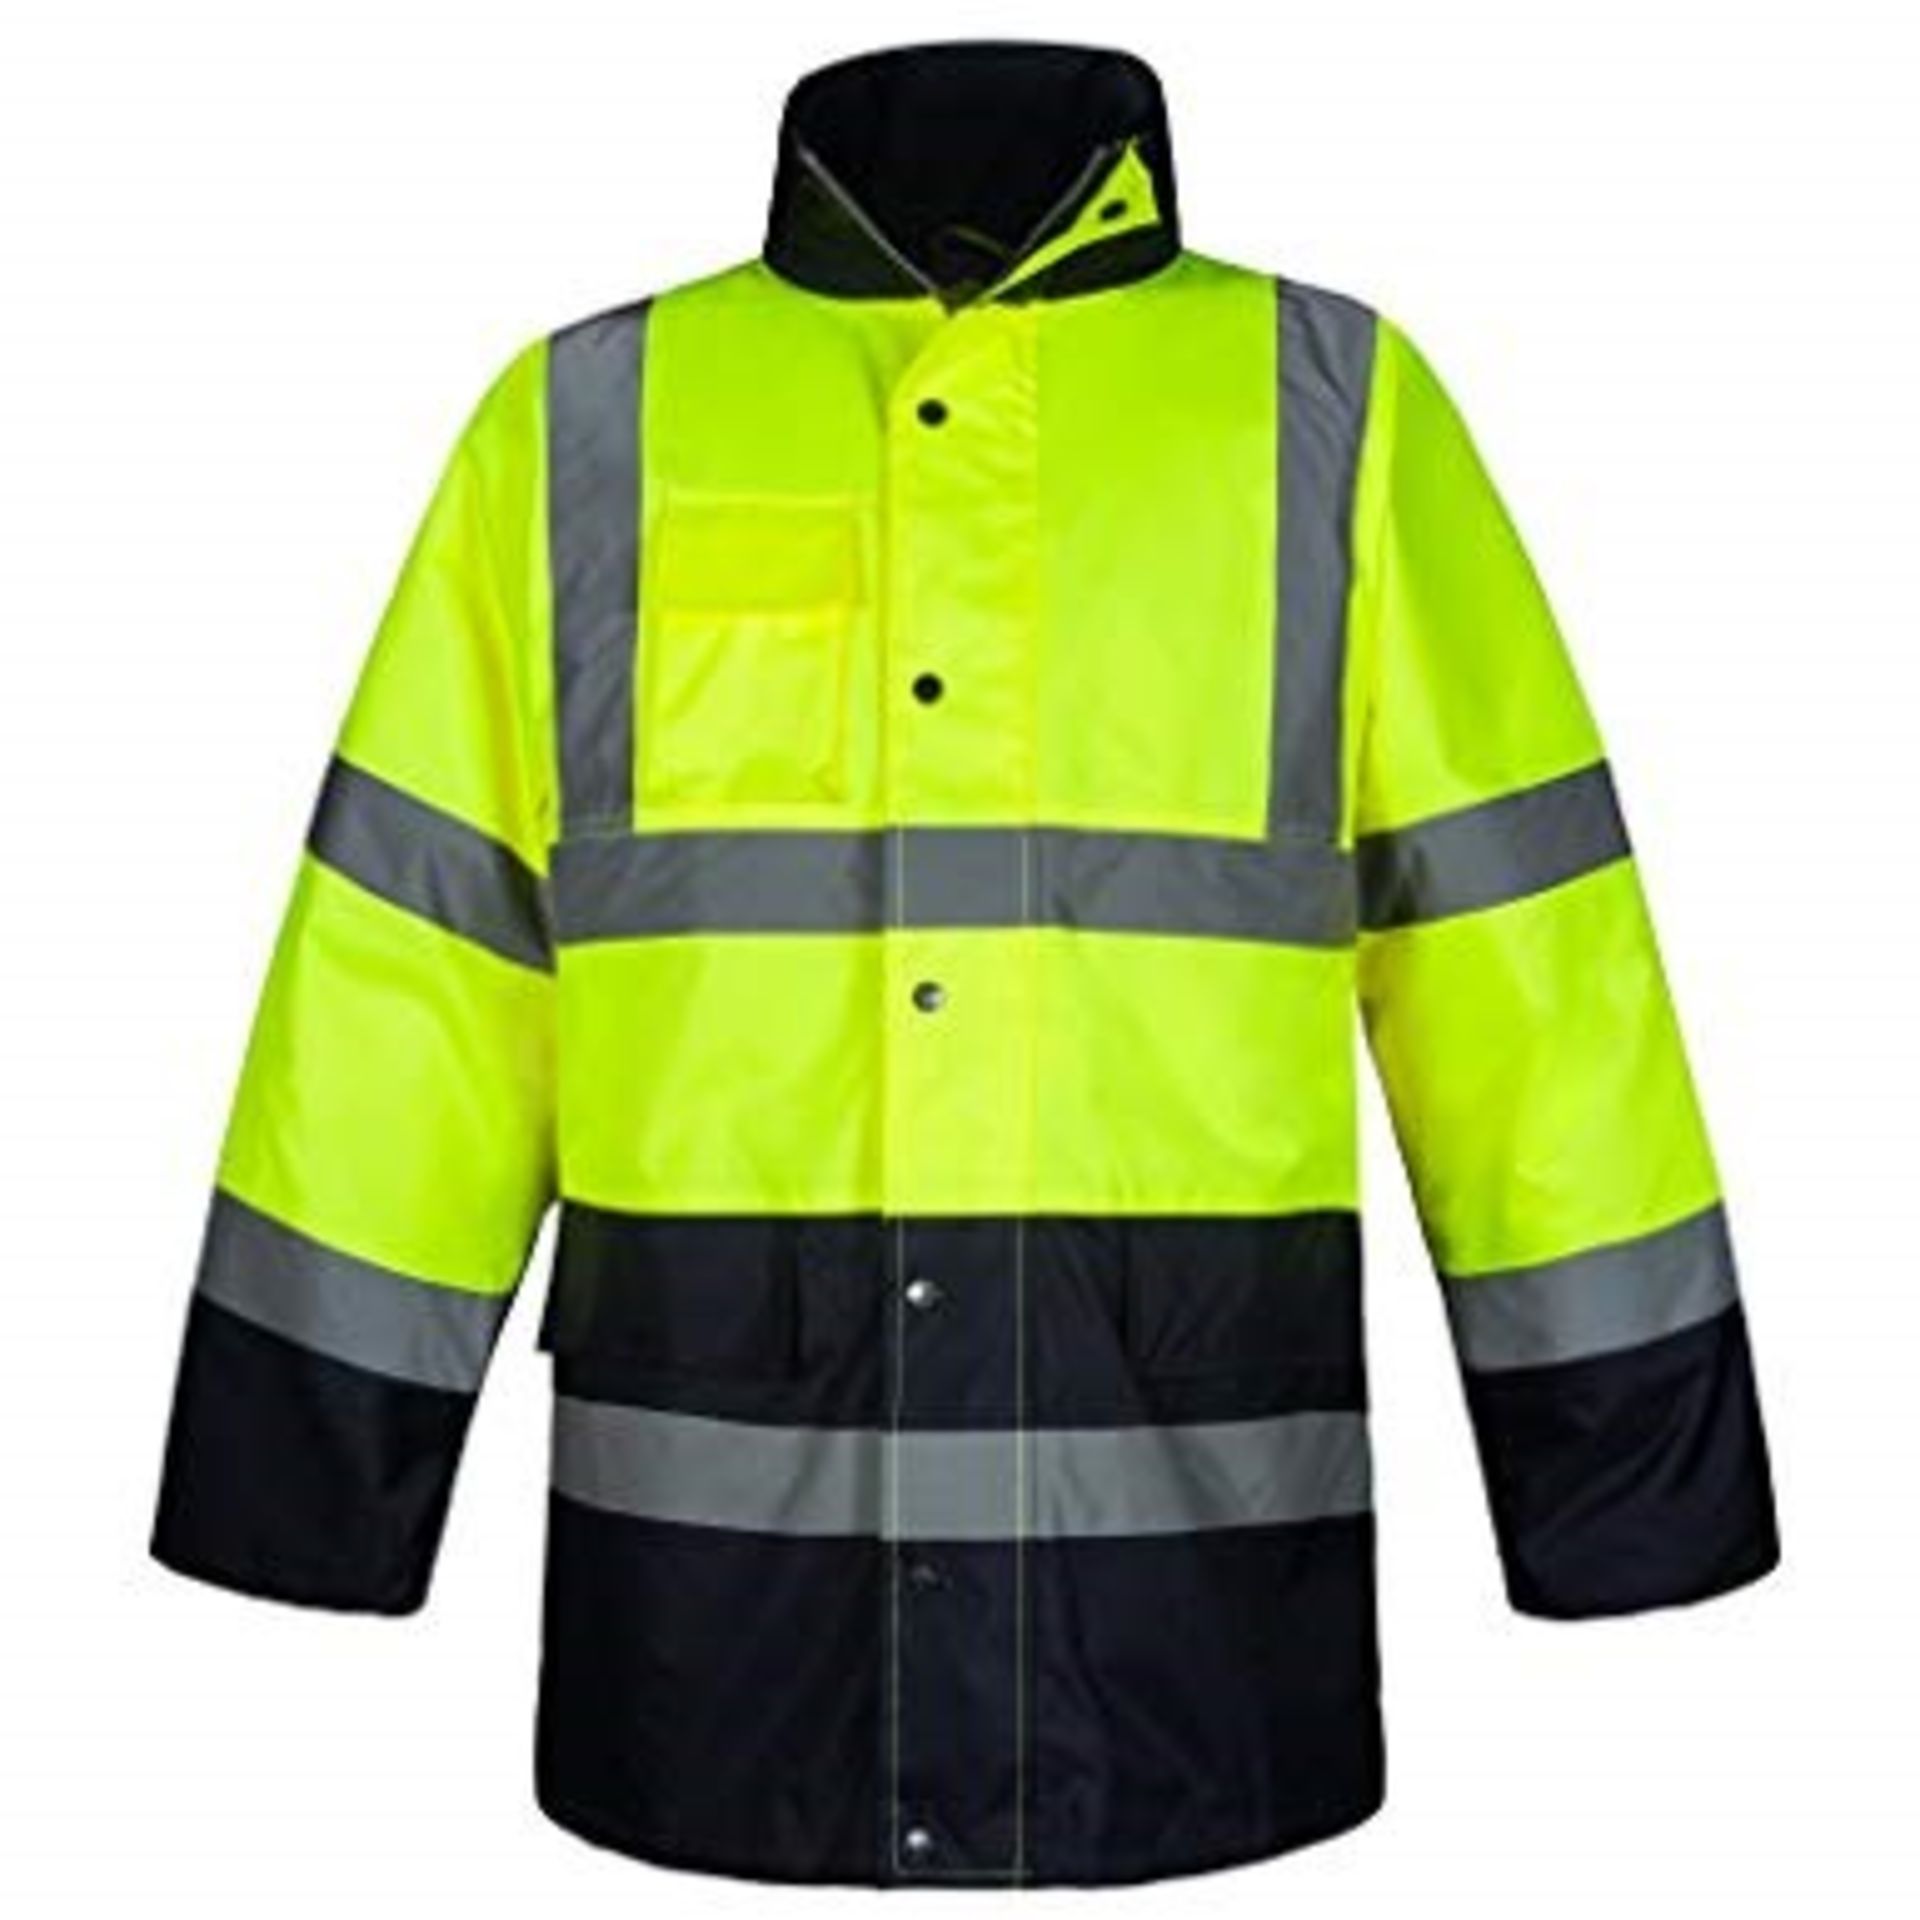 1 BAGGED BLACKROCK 2 TONE HI-VIS COAT IN YELLOW/NAVY, 5XL (VIEWING HIGHLY RECOMMENDED)